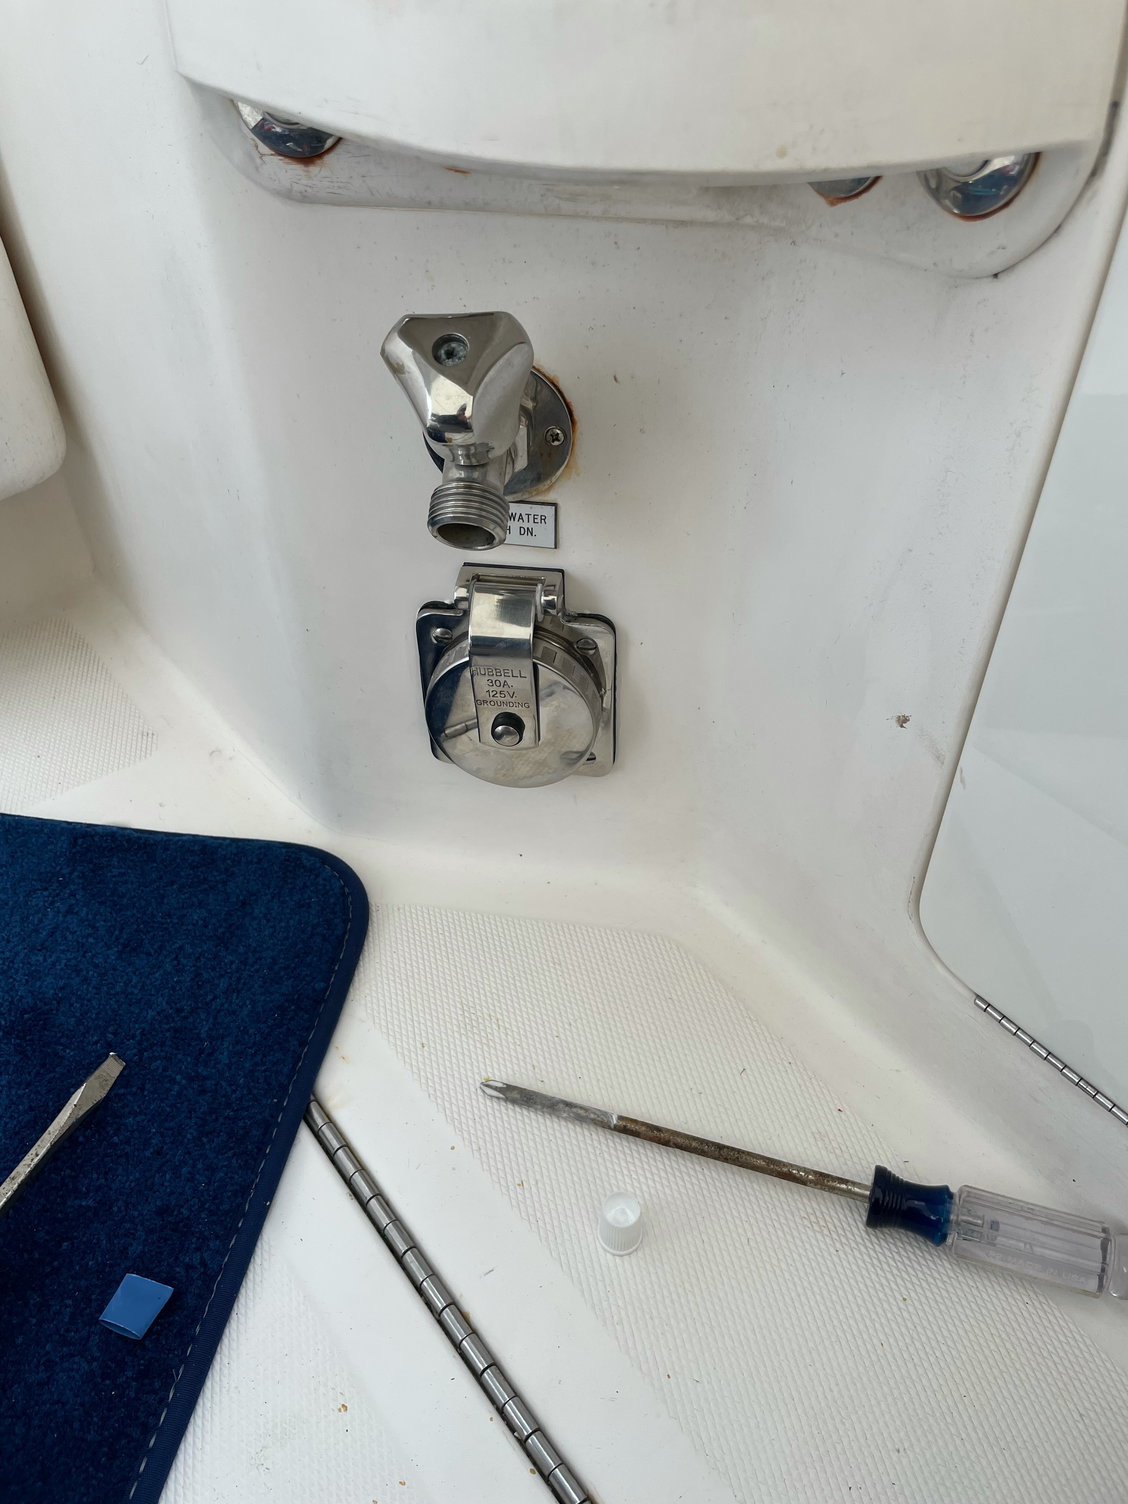 My electric reel outlet installs - The Hull Truth - Boating and Fishing  Forum